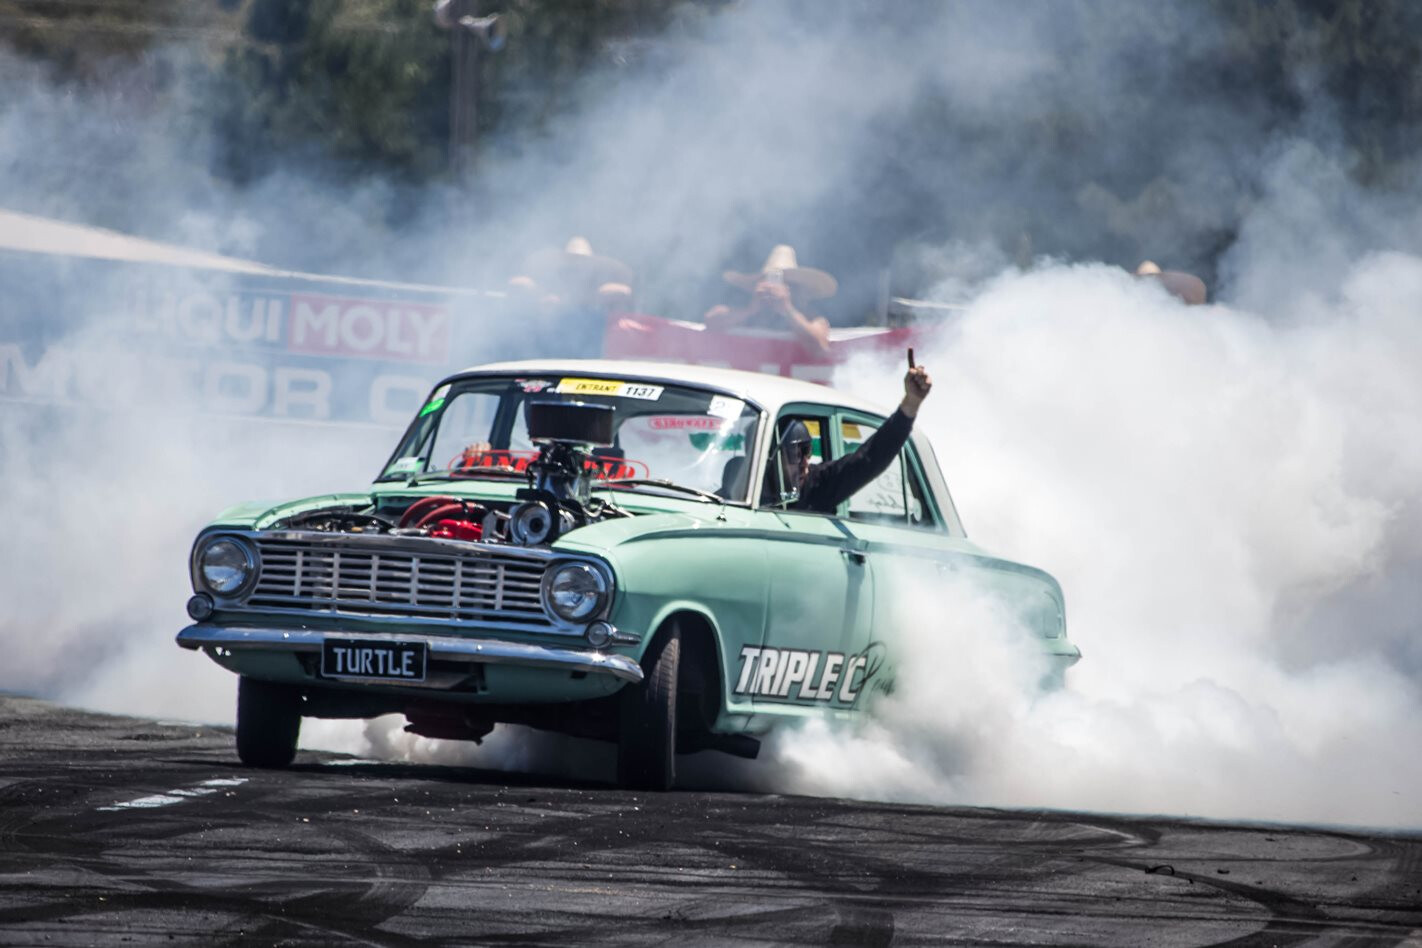 VIDEO: TURTLE THE VAUXHALL VICTOR BURNOUT CAR AT SUMMERNATS 29